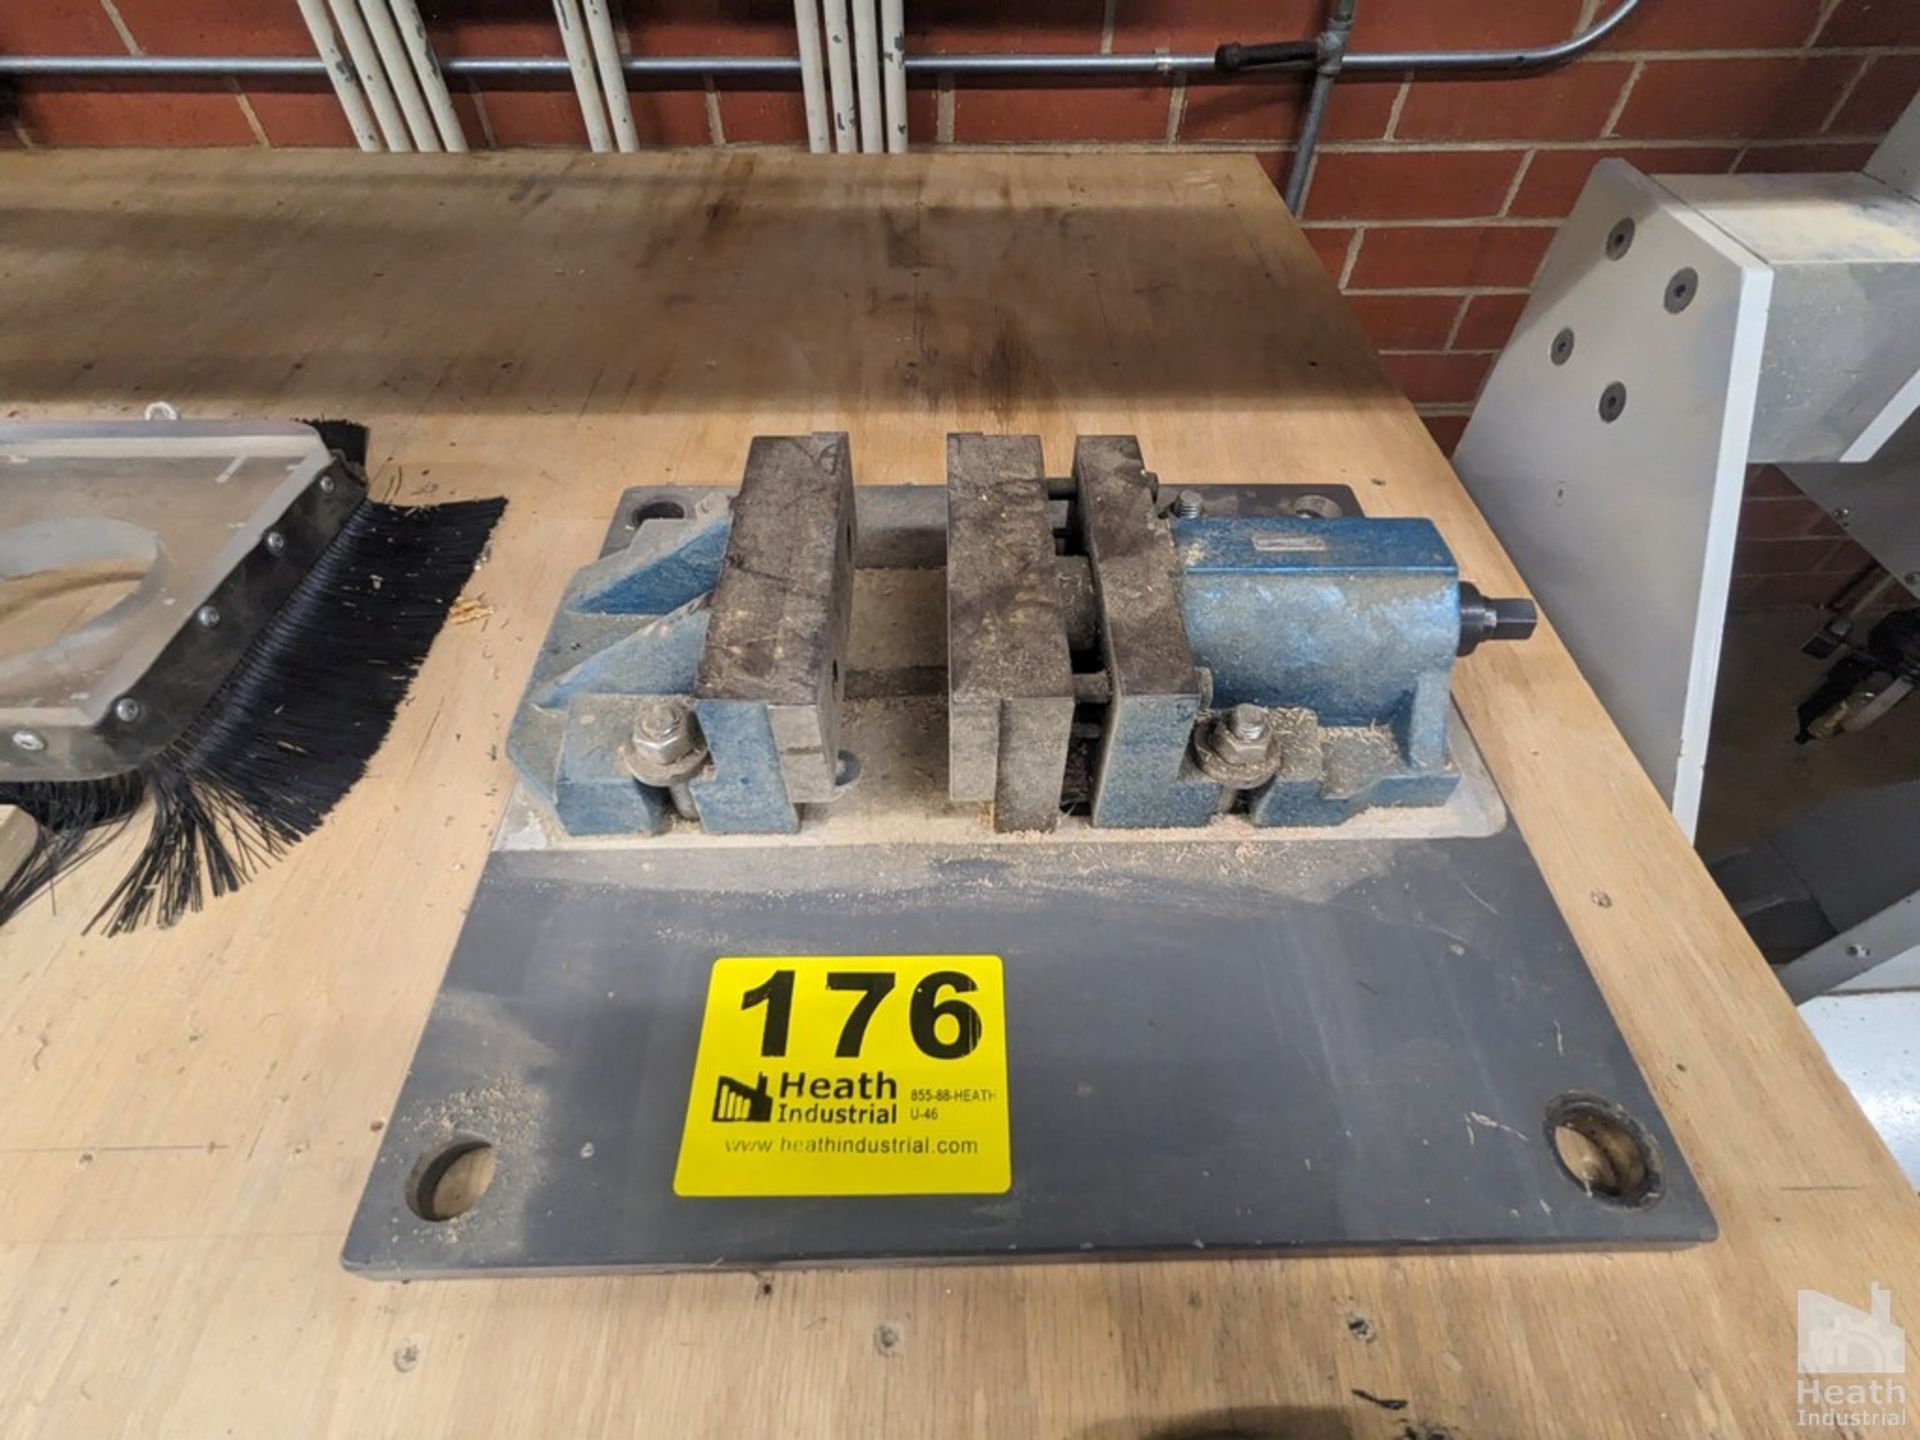 6" TWO PIECE VISE MOUNTED TO STEEL PLATE Free Pickup In Hoffman Estates, Illinois